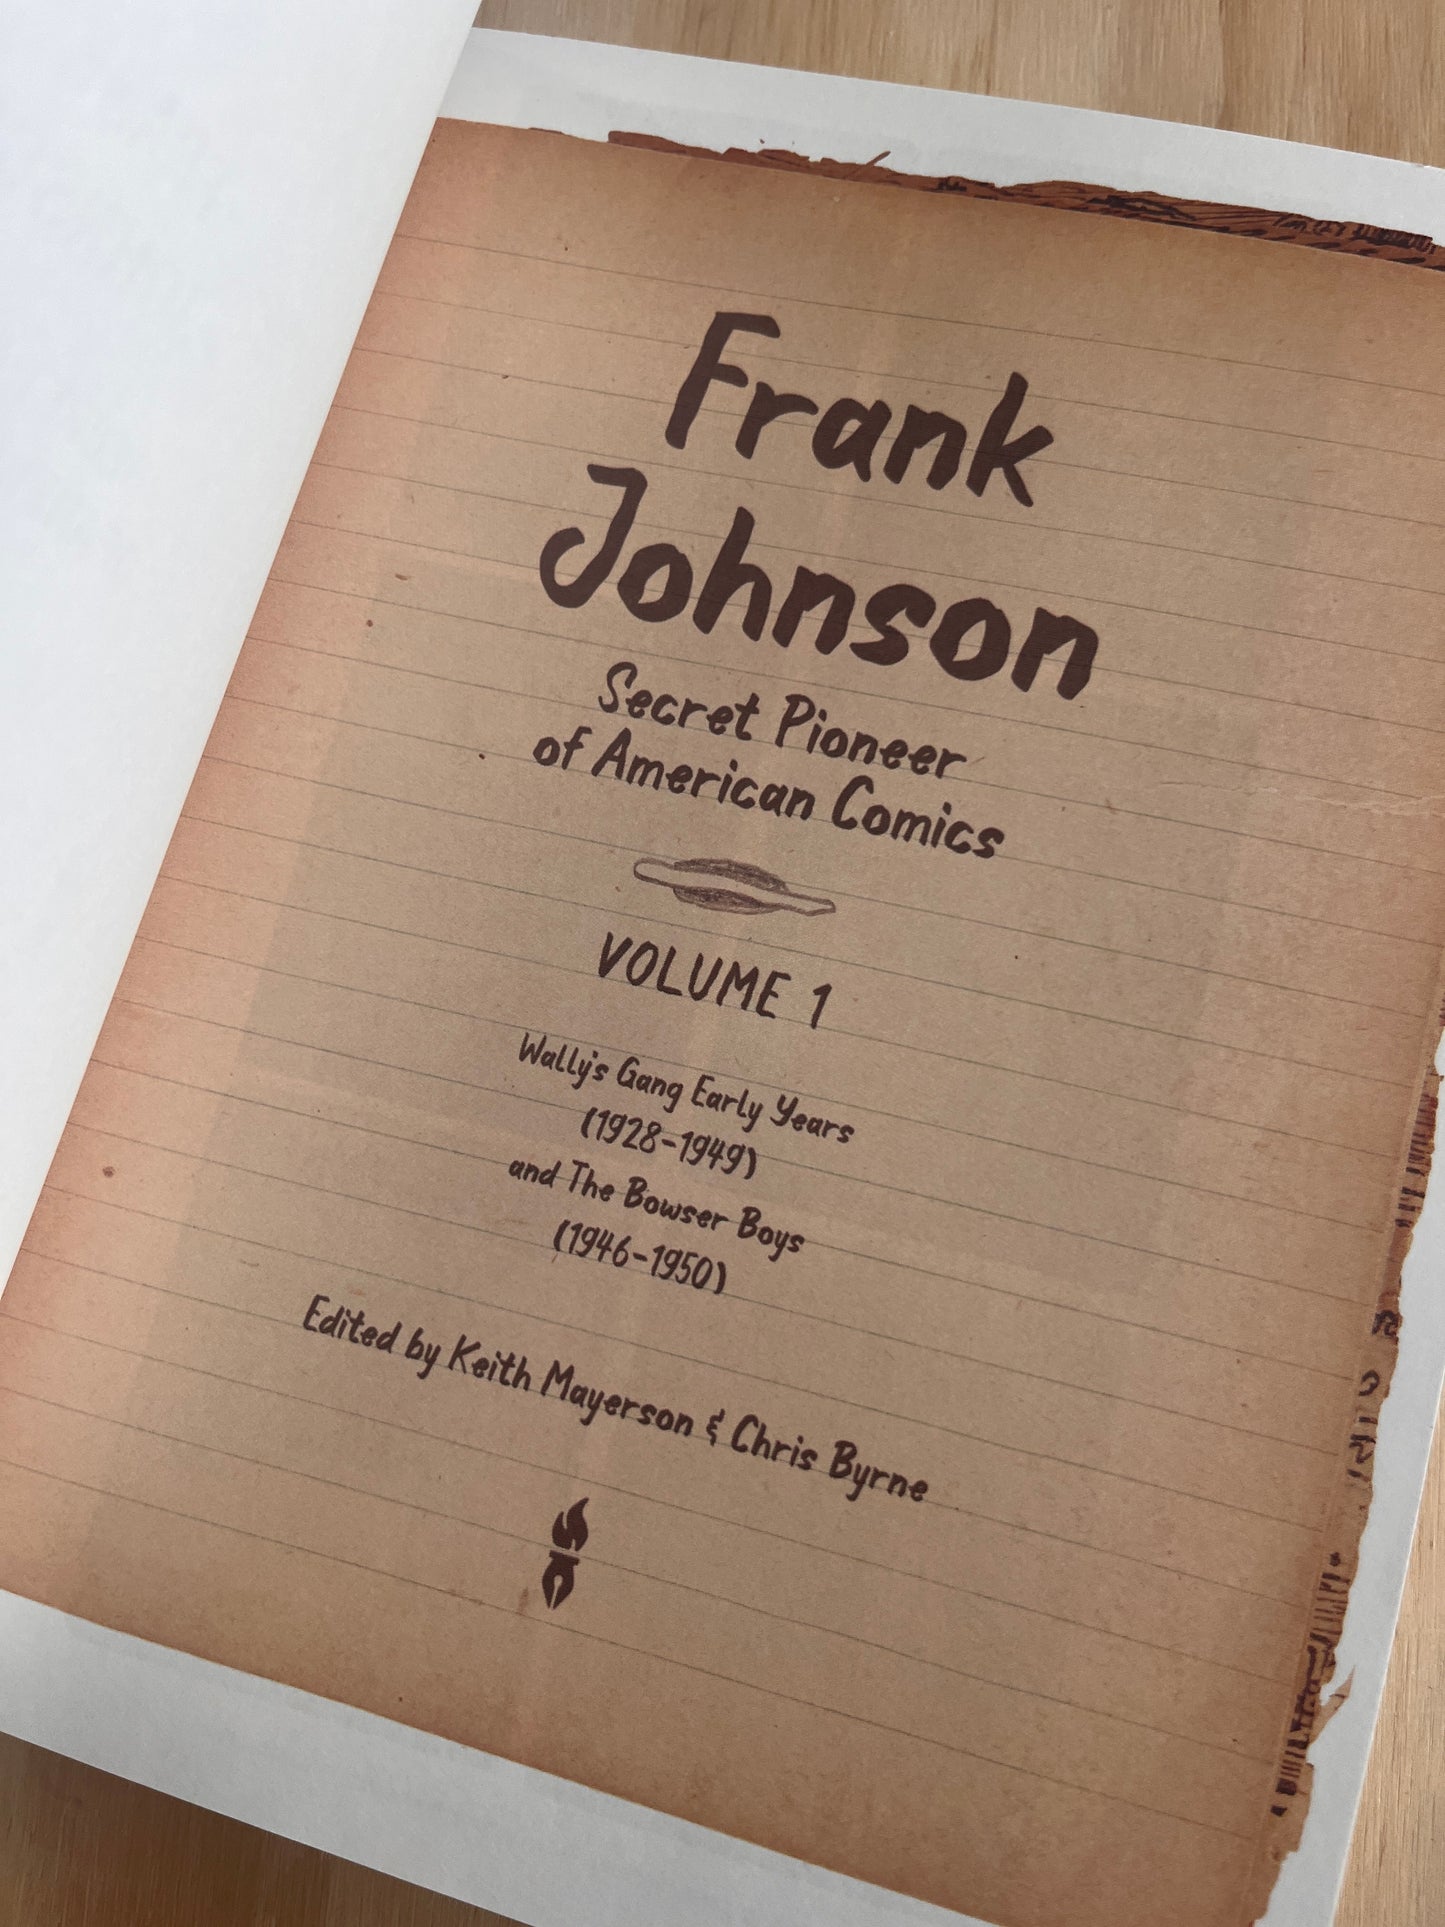 Frank Johnson, Secret Pioneer of American Comics Vol. 1: Wally's Gang Early Years (1928-1949) and The Bowser Boys (1946-1950)